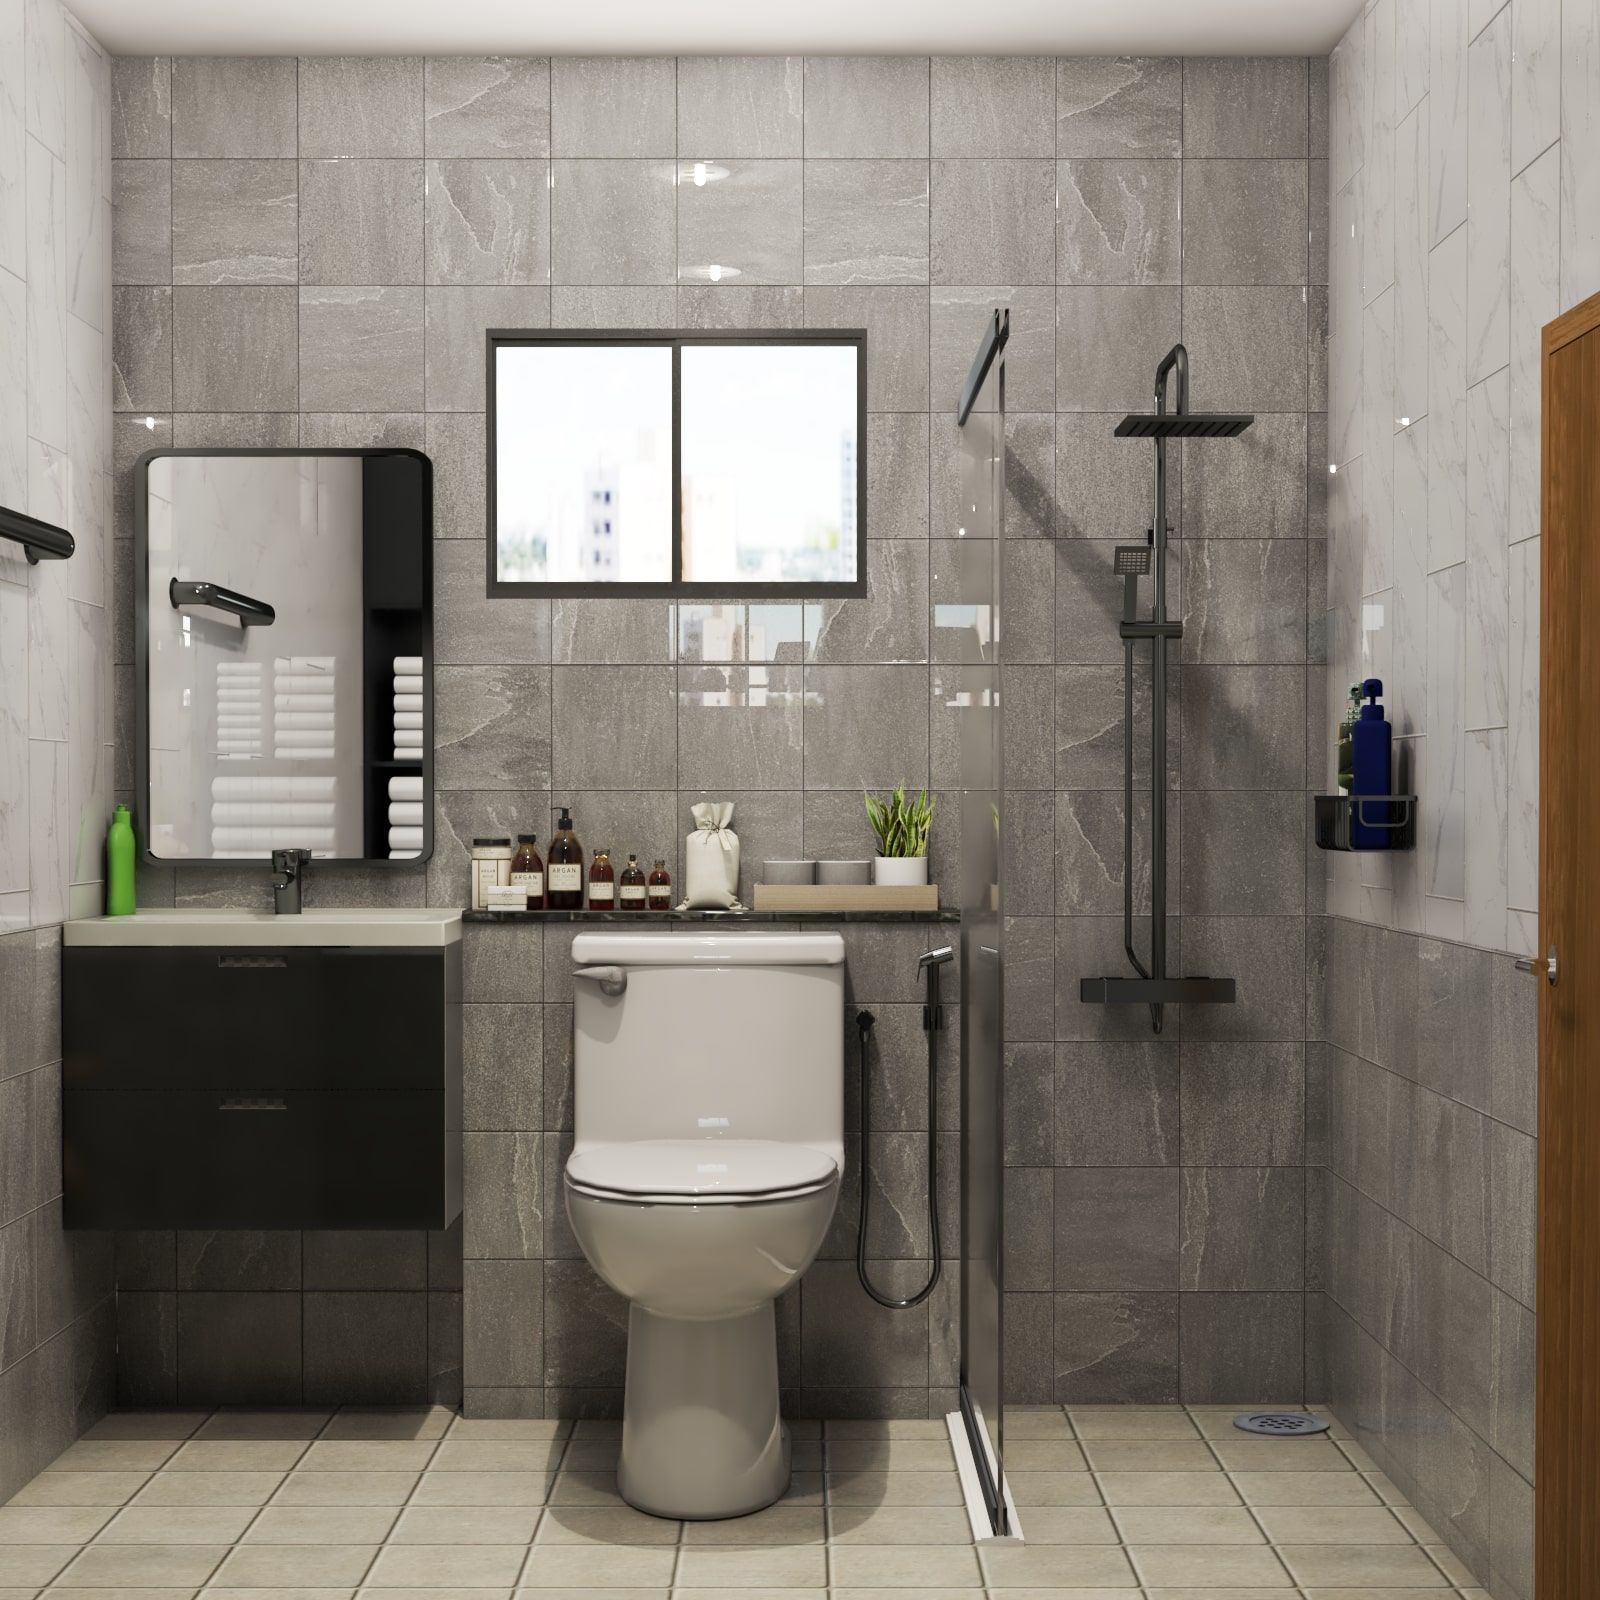 Modern Small Bathroom Design With Wall-Mounted Vanity Unit